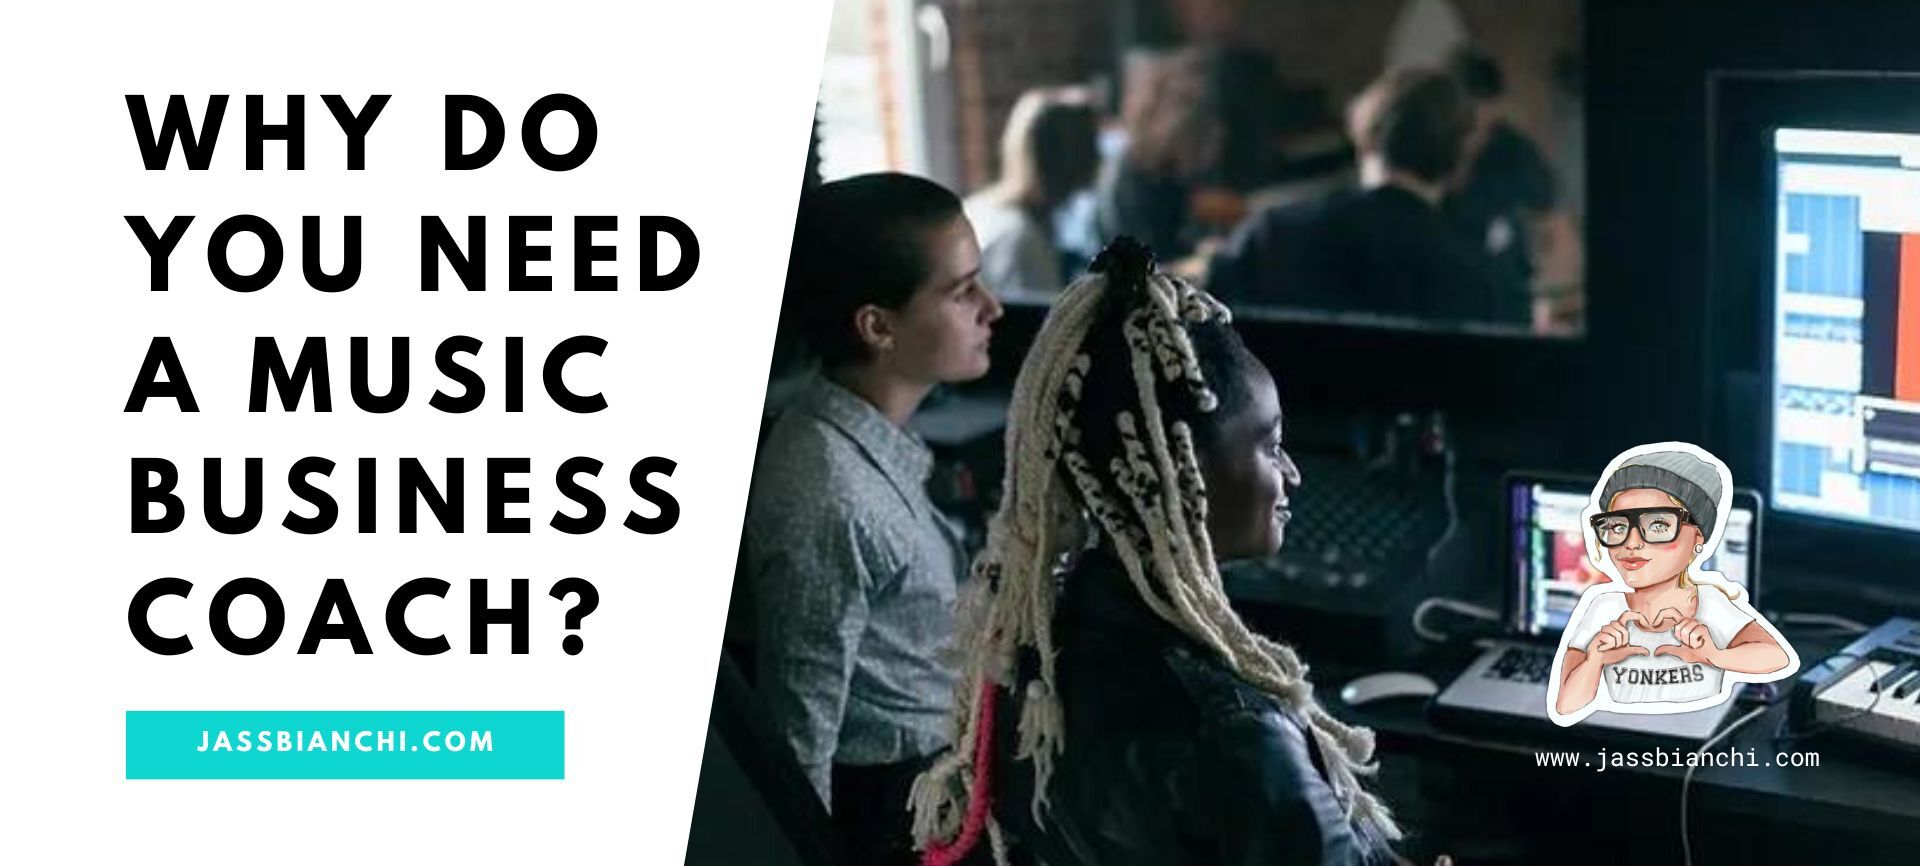 Why Do You Need a Music Business Coach?